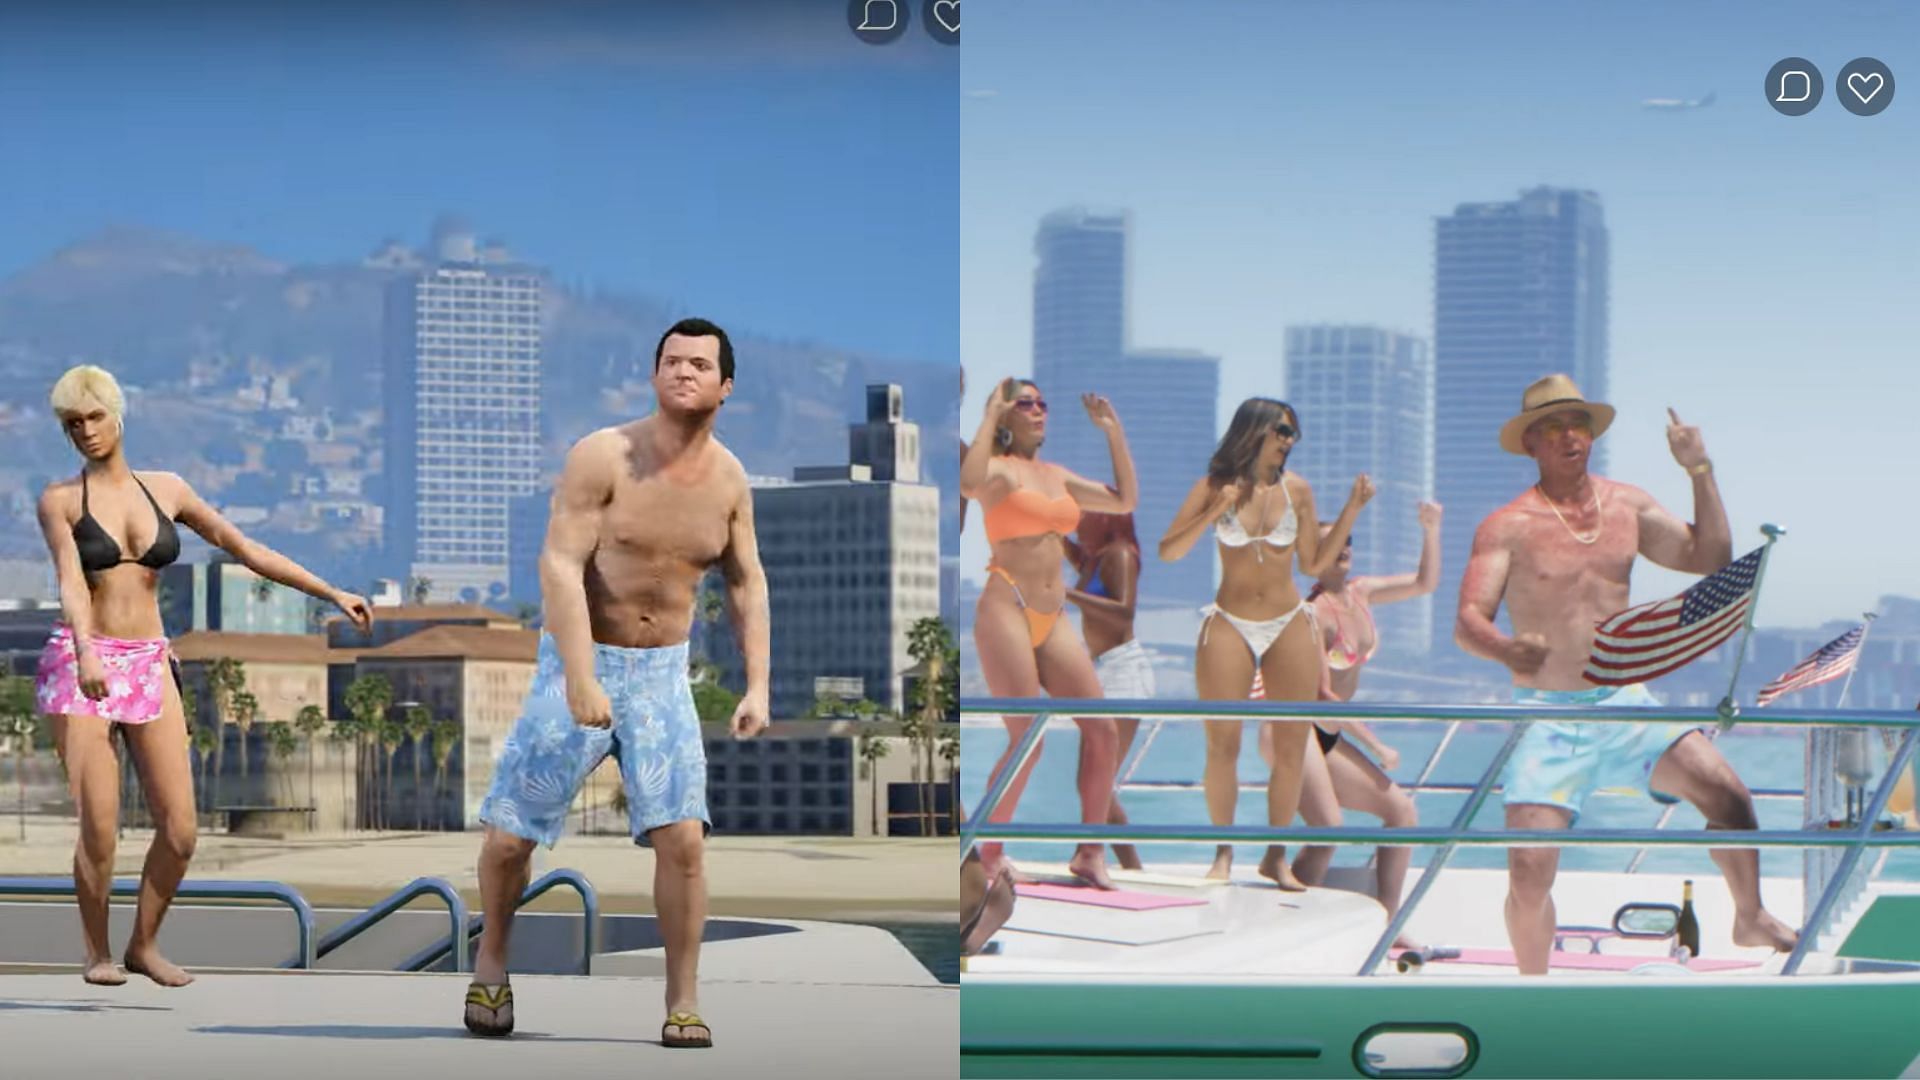 Comparison between the modded Grand Theft Auto 6 trailer and the original one (4/5) (Images via YouTube/@RavenwestR1, Rockstar Games)